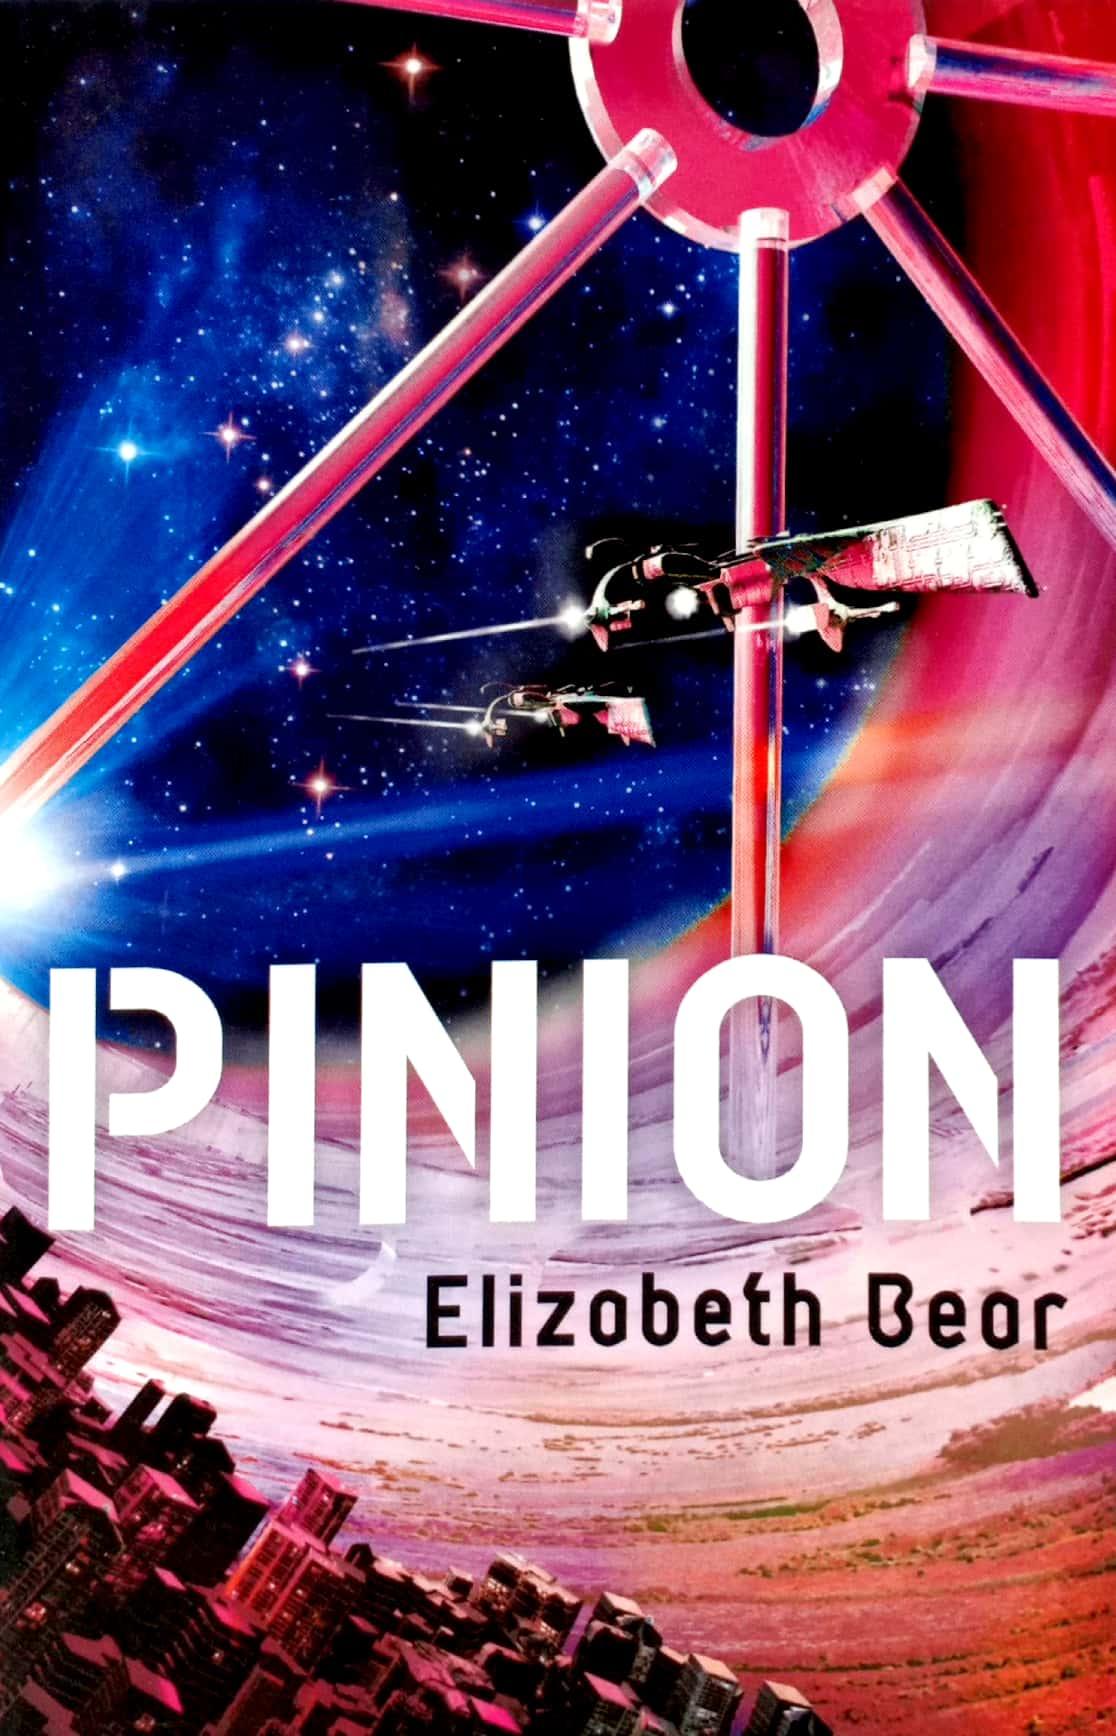 Pinion: Book One (Jacob's Ladder Sequence)